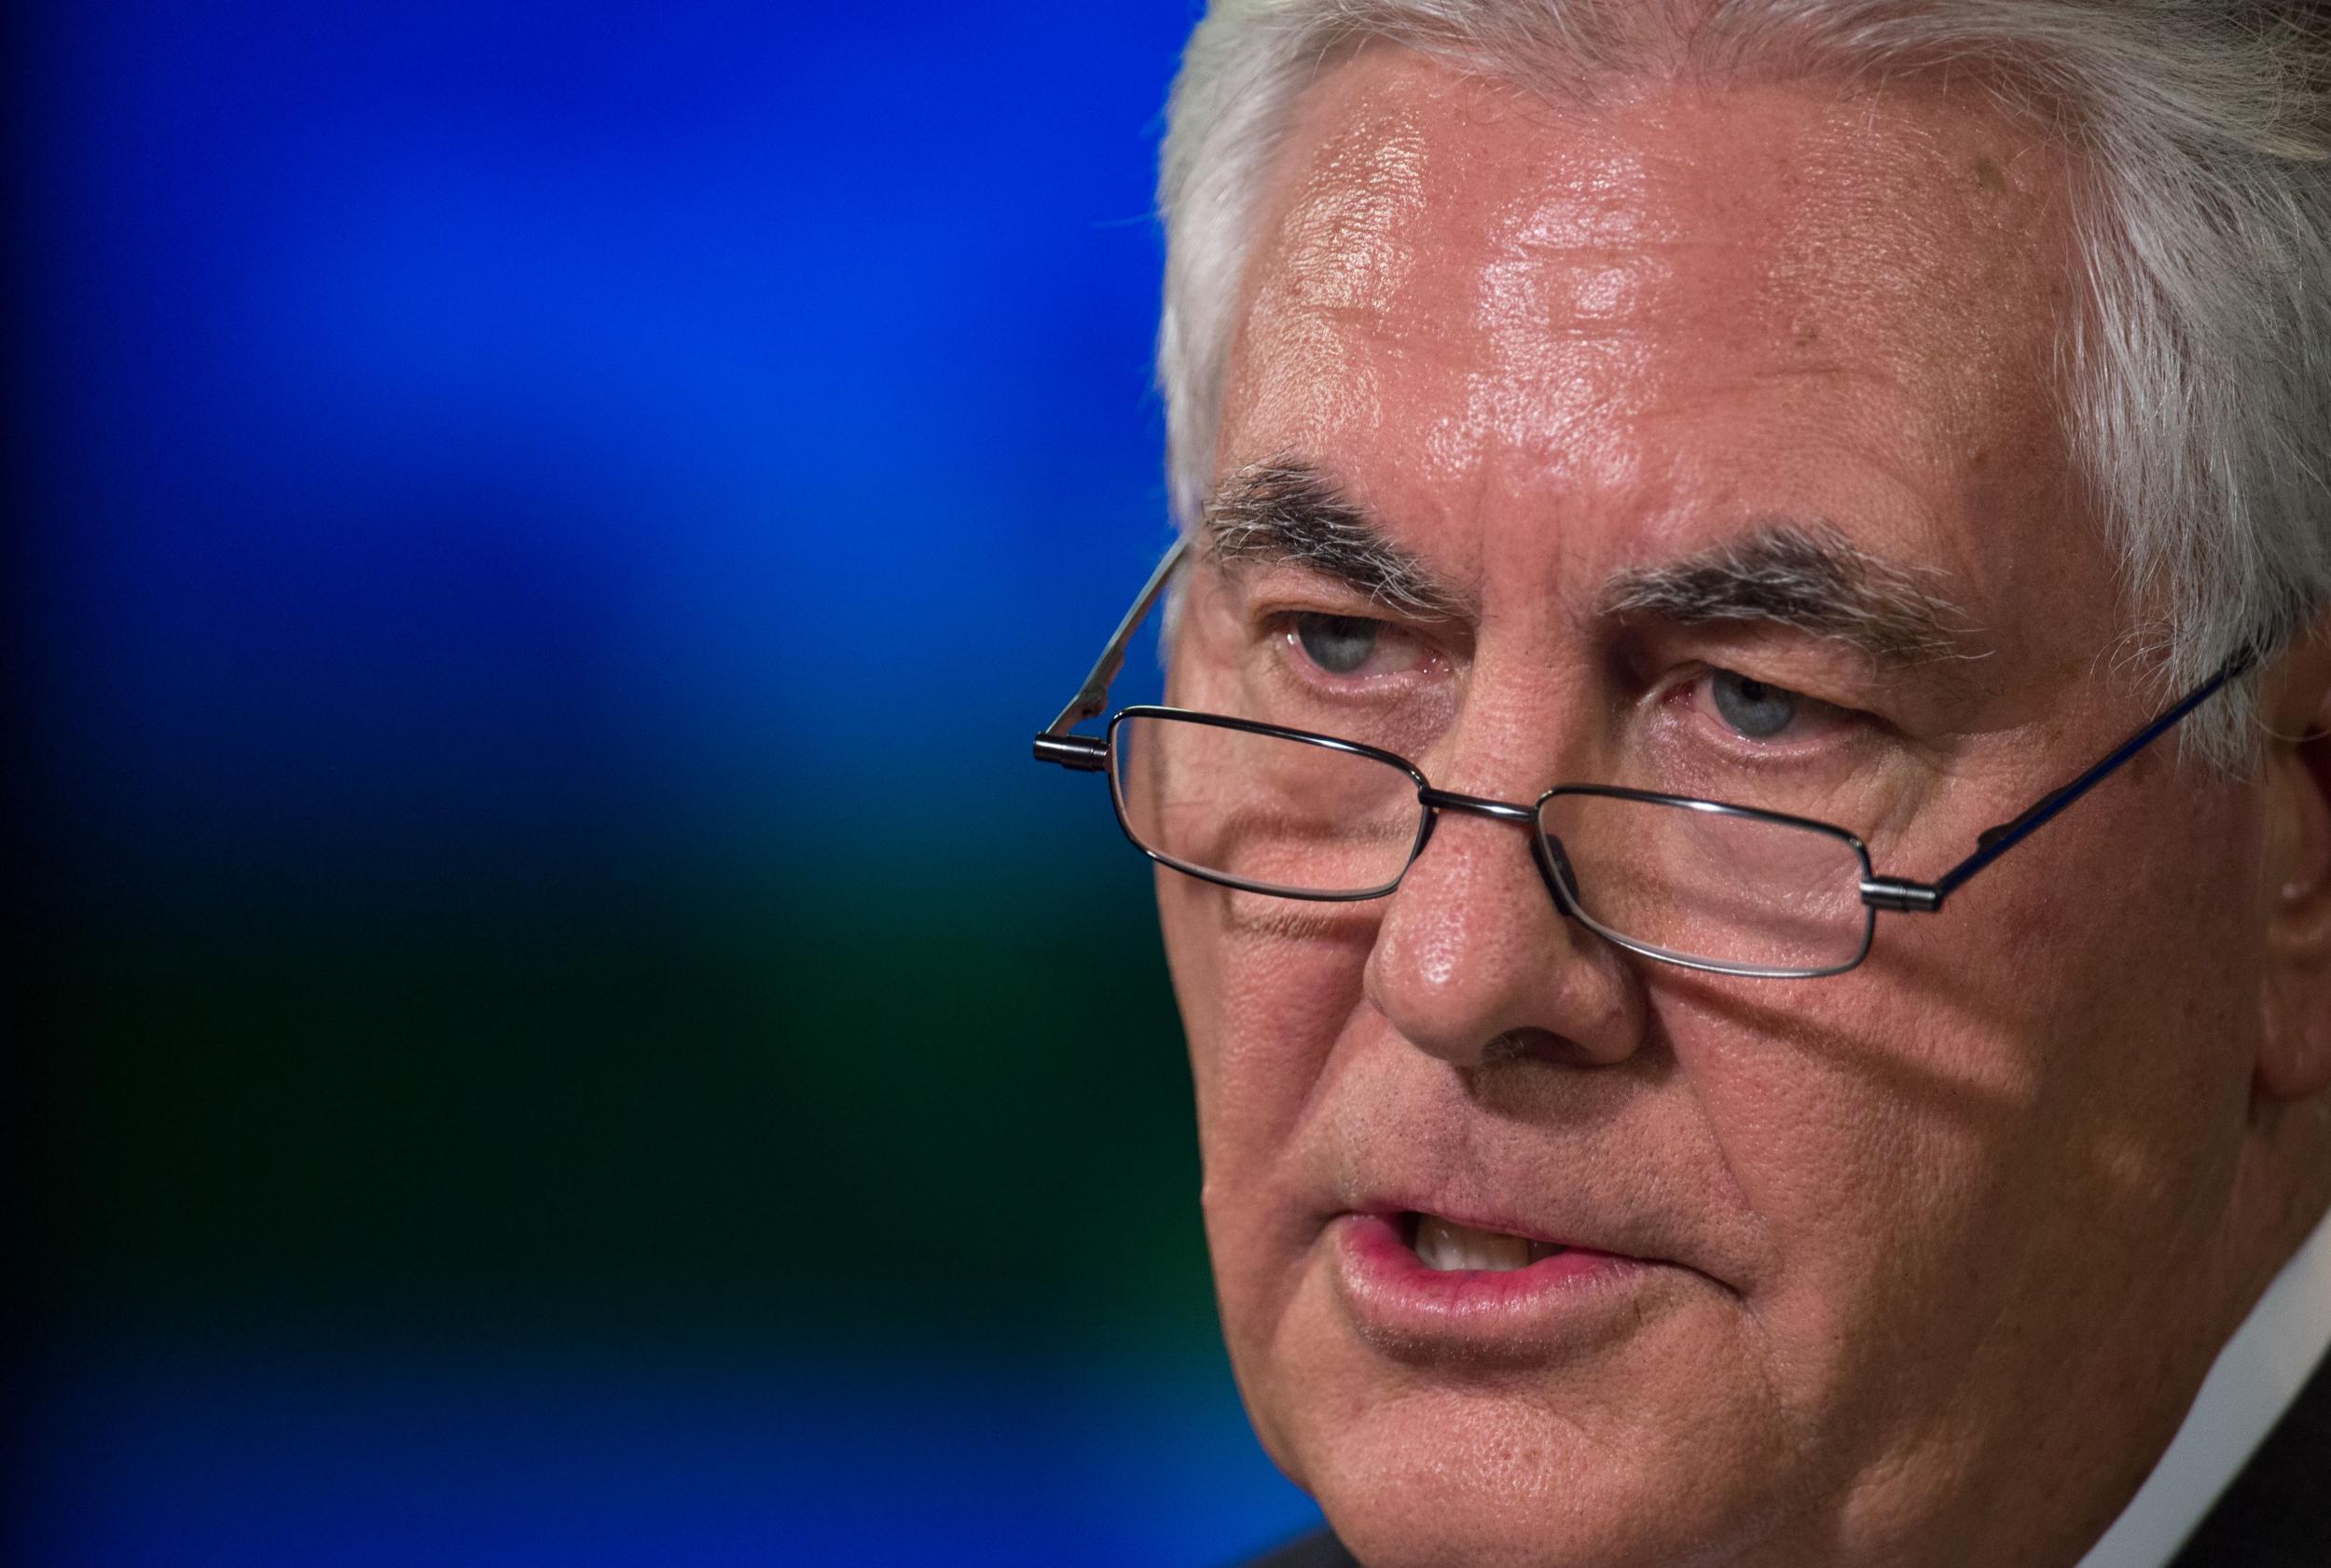 US Secretary of State Rex Tillerson ran ExxonMobil for 10 years and used a fake name, Wayne Tracker, to discuss climate change